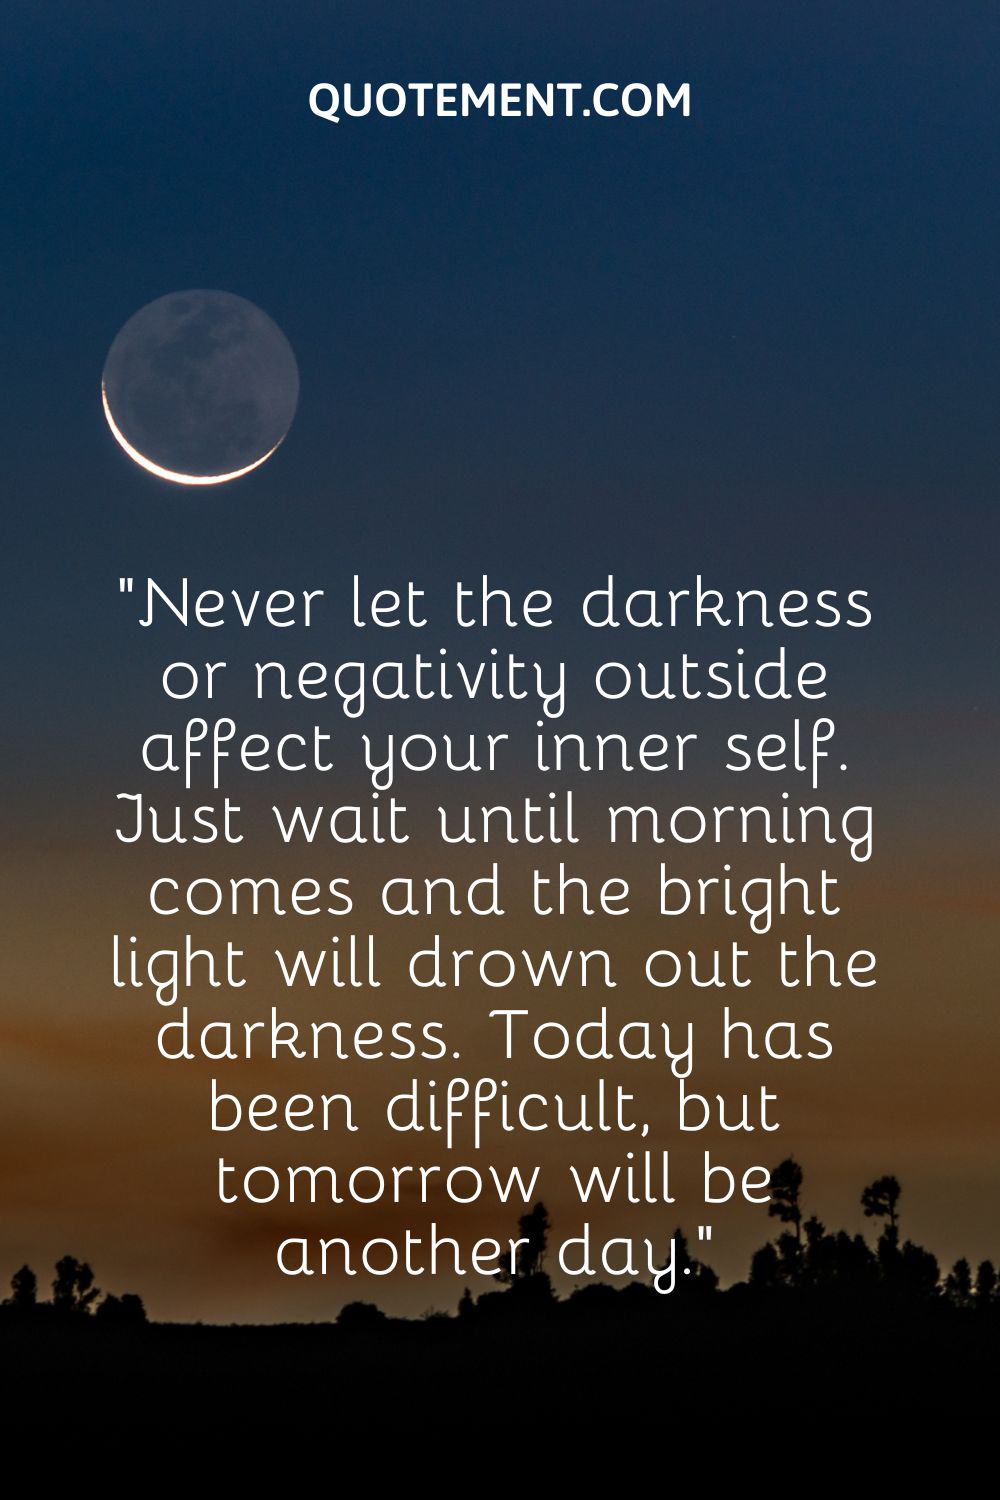 Never let the darkness or negativity outside affect your inner self.